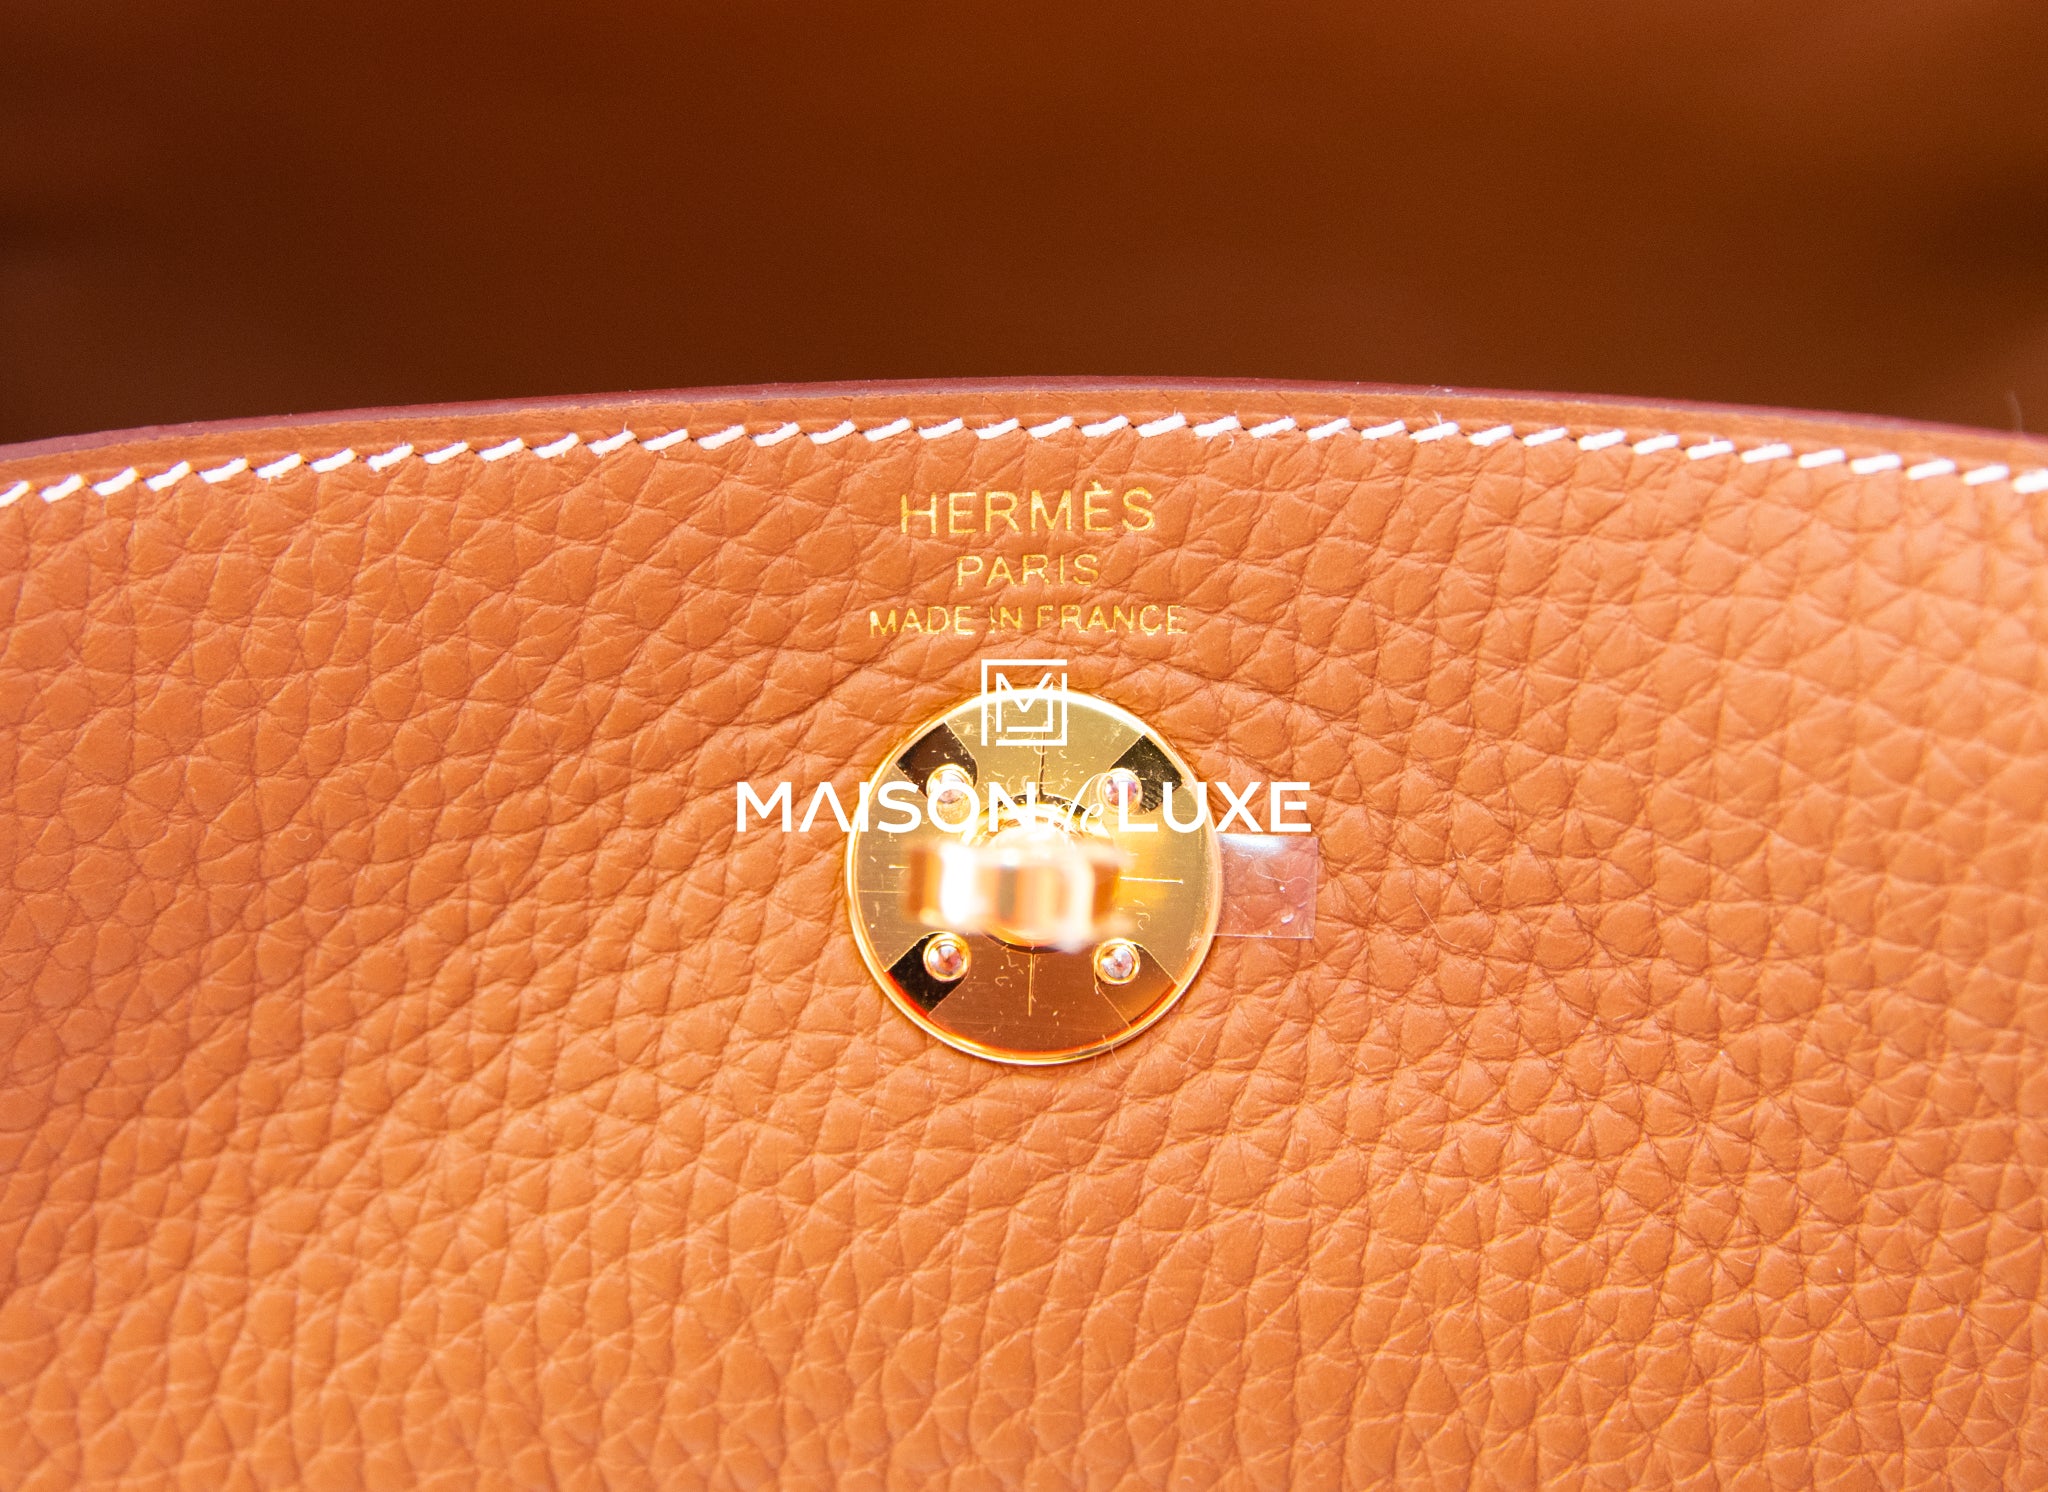 Hermes Lindy Mini Bag Togo Leather Gold Hardware In Marble